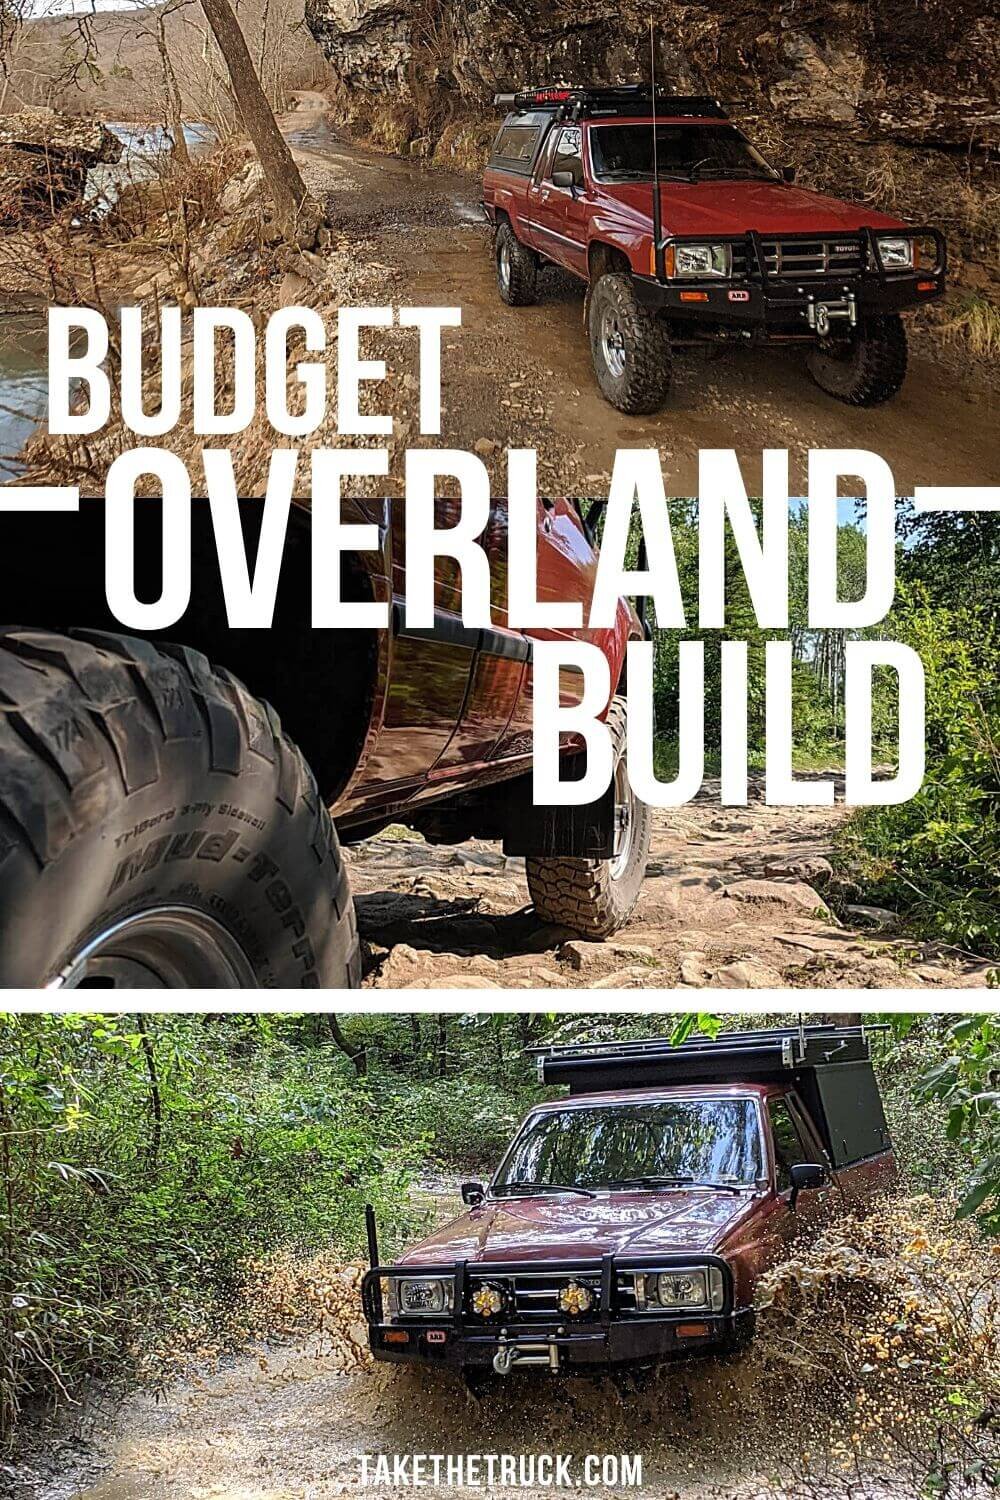 Lots of posts about how to build a budget overland vehicle and DIY truck camper! From the truck bed camping sleeping platform to overlanding gear to the truck bed camping interior, it’s all here!